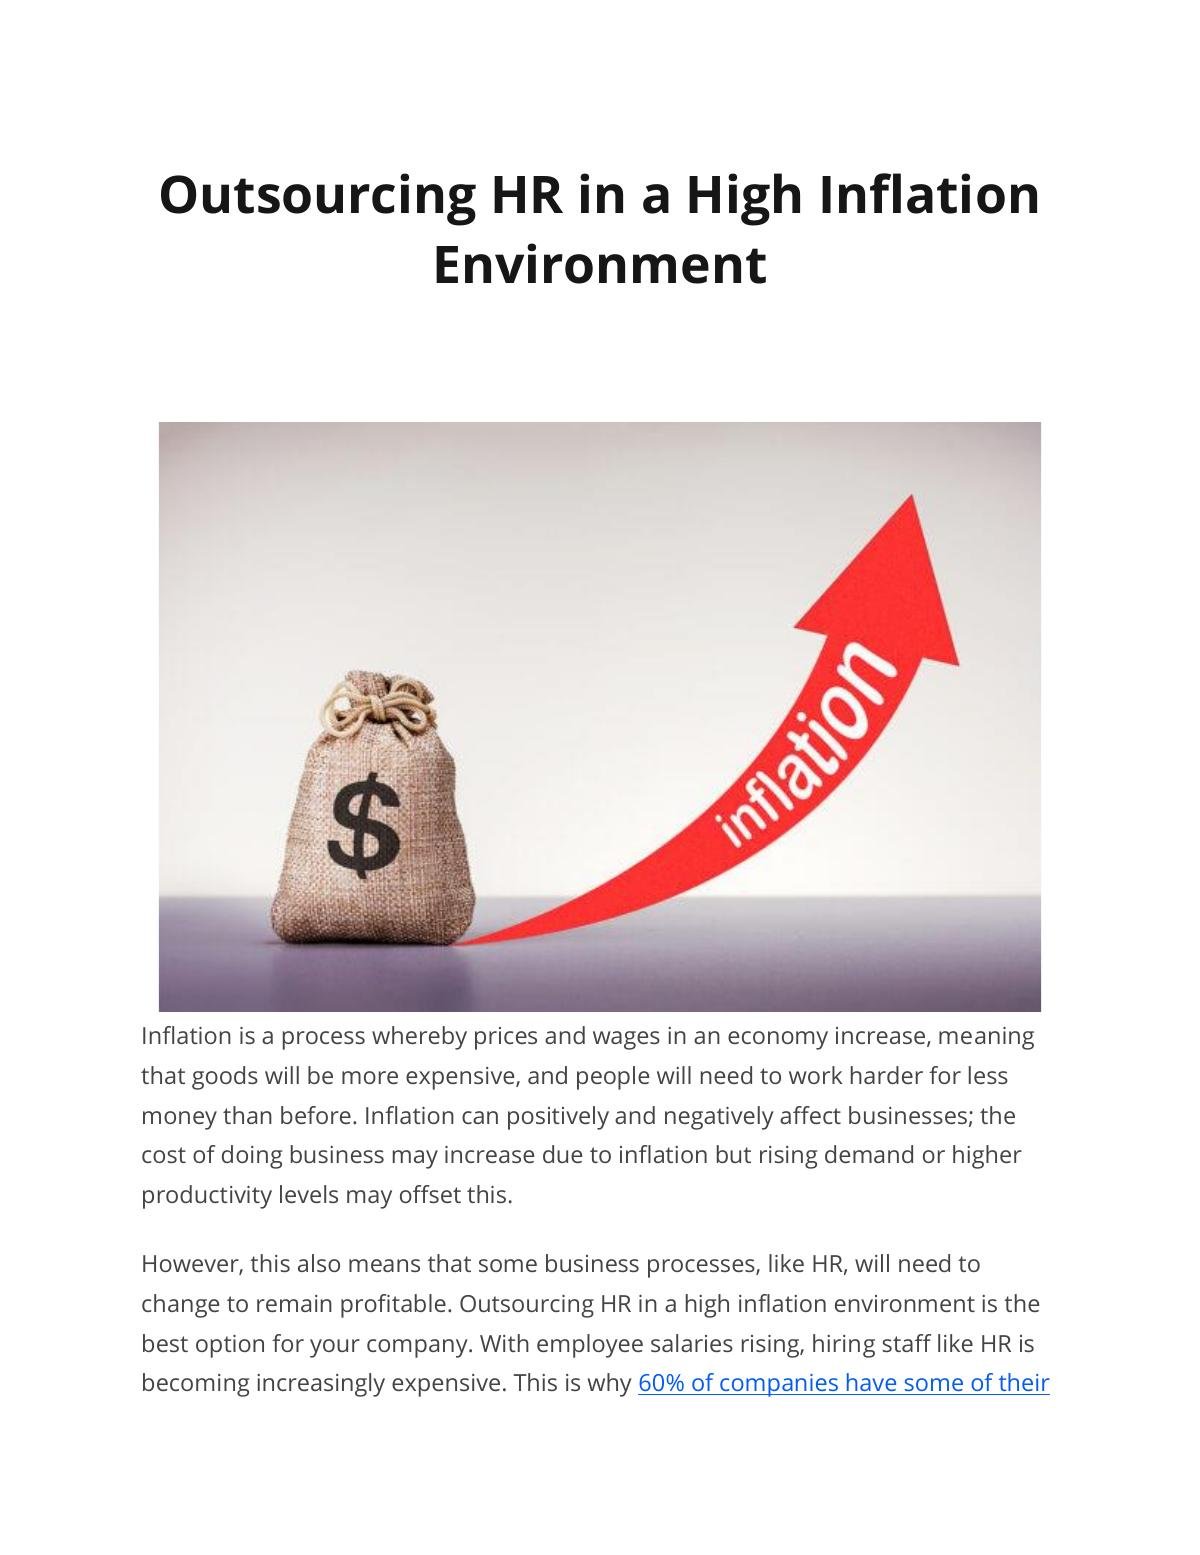 Outsourcing HR in a High Inflation Environment 